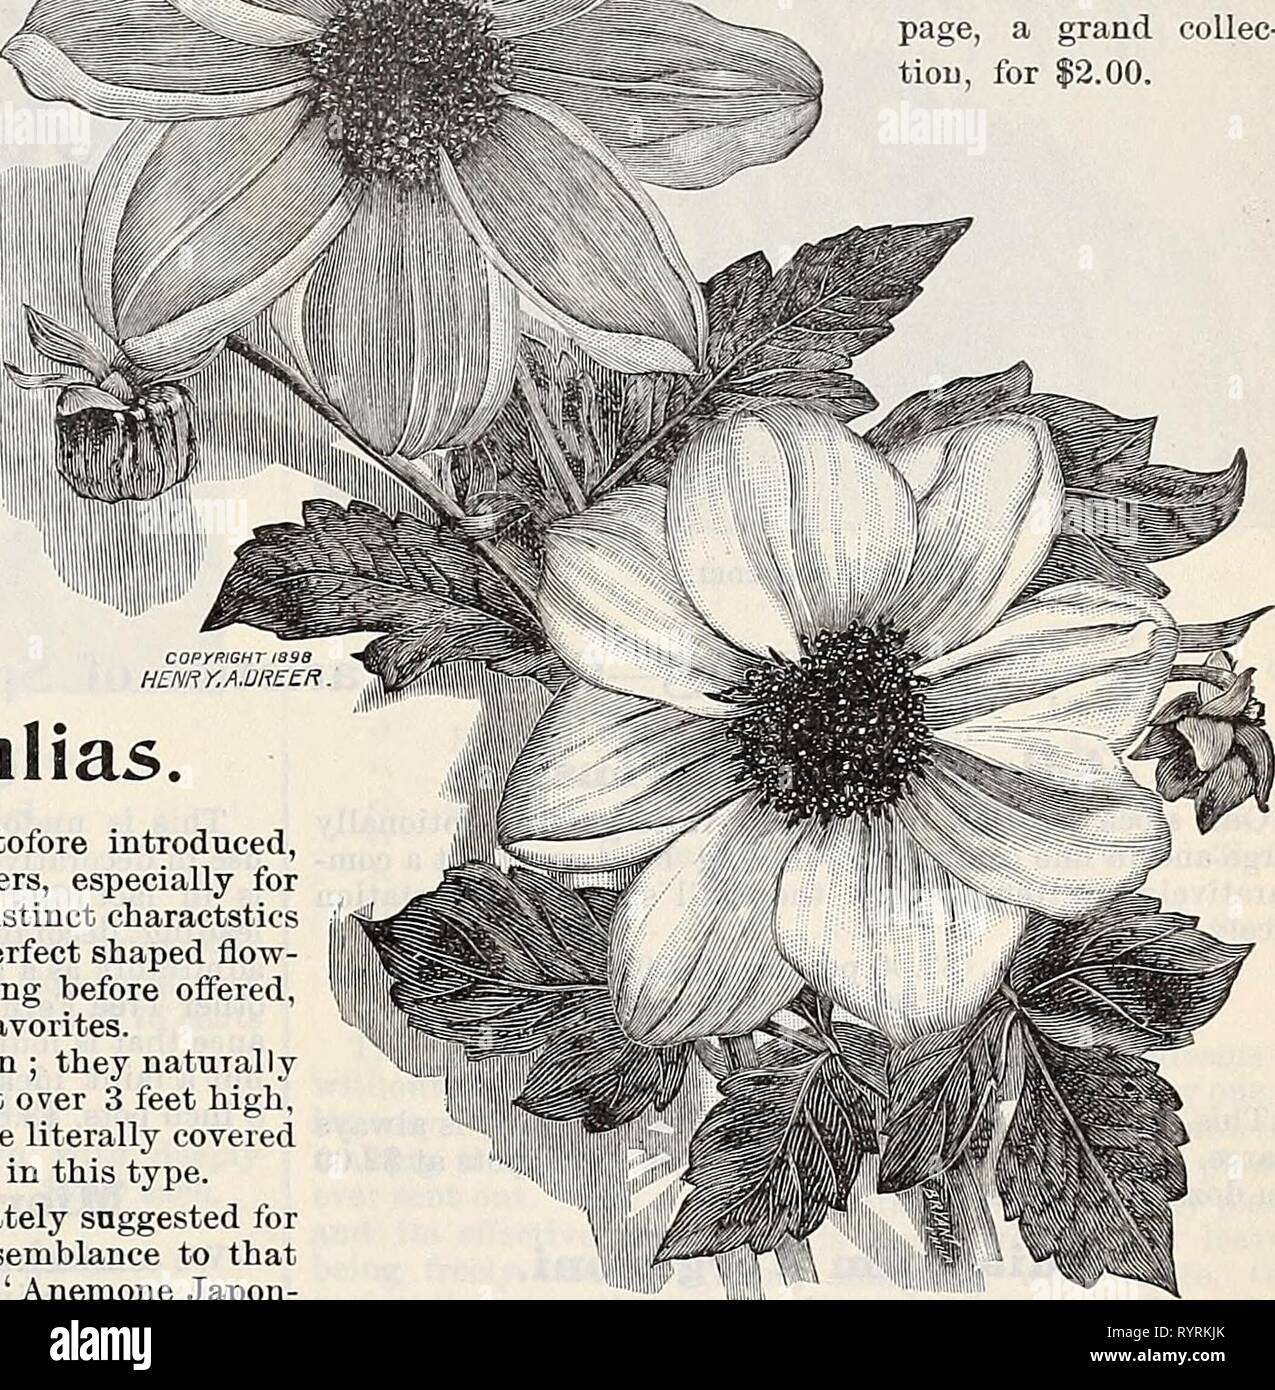 Dreer's quarterly wholesale price list Dreer's quarterly wholesale price list of reliable seeds, plants, bulbs &c . dreersquarterlyw1899henr Year: 1899  DREER'S WHOLESALE PRICE LIST. 31 Ten Choice Single Dahlias Dearest. White edged buff, very dis- tinct. Edina. A beautiful fancy variety, flow- ers pure white, with yellow disc around base of petals, spotted and veined crim- son. Juno. White, tipped lavender ; yellow disc. John DowTiie. Intense glowing crim- son-scarlet Miss Roberts. Fine large yellow. Painted Lady. Crimsou-pink, striped darker. Paragon. Dark maroon, edged purple , Serratipetal Stock Photo